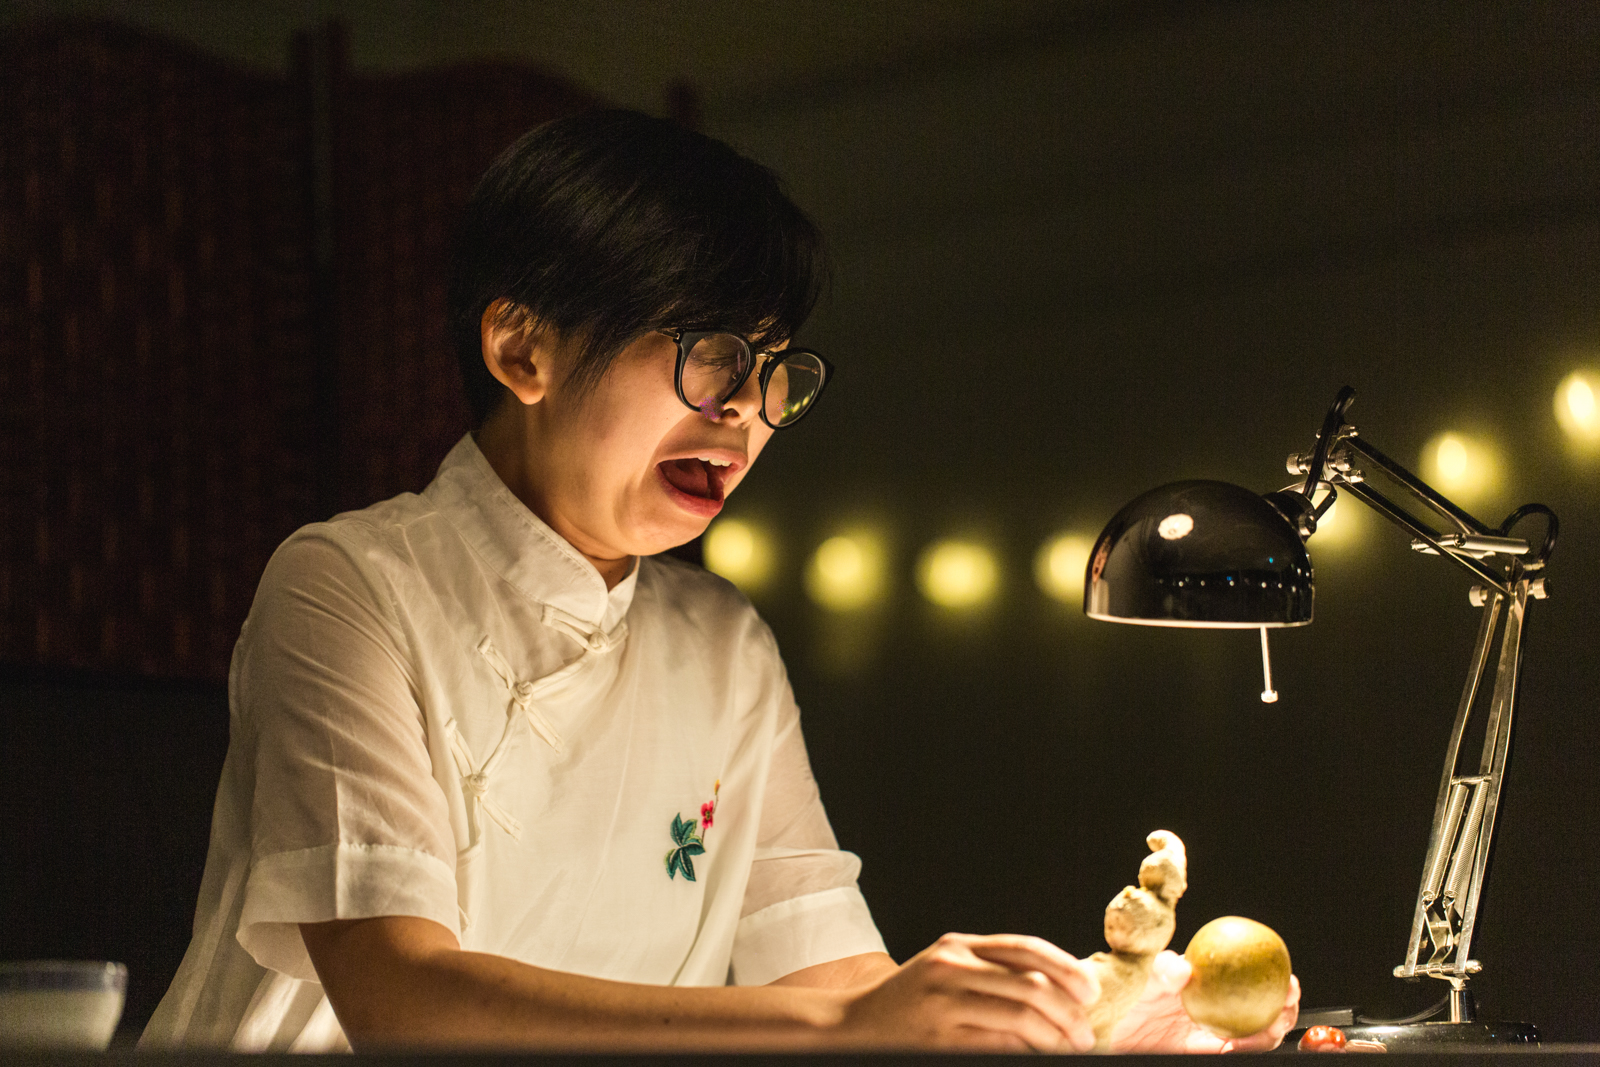 Gloria Mok has short black hair, black rimmed glasses, and is wearing a white dress with a pink and green embroidered flower on her chest. She is holding a ginger root and a monk fruit as if they are puppets. The background is black with a string of warm glowing lights in the distance.